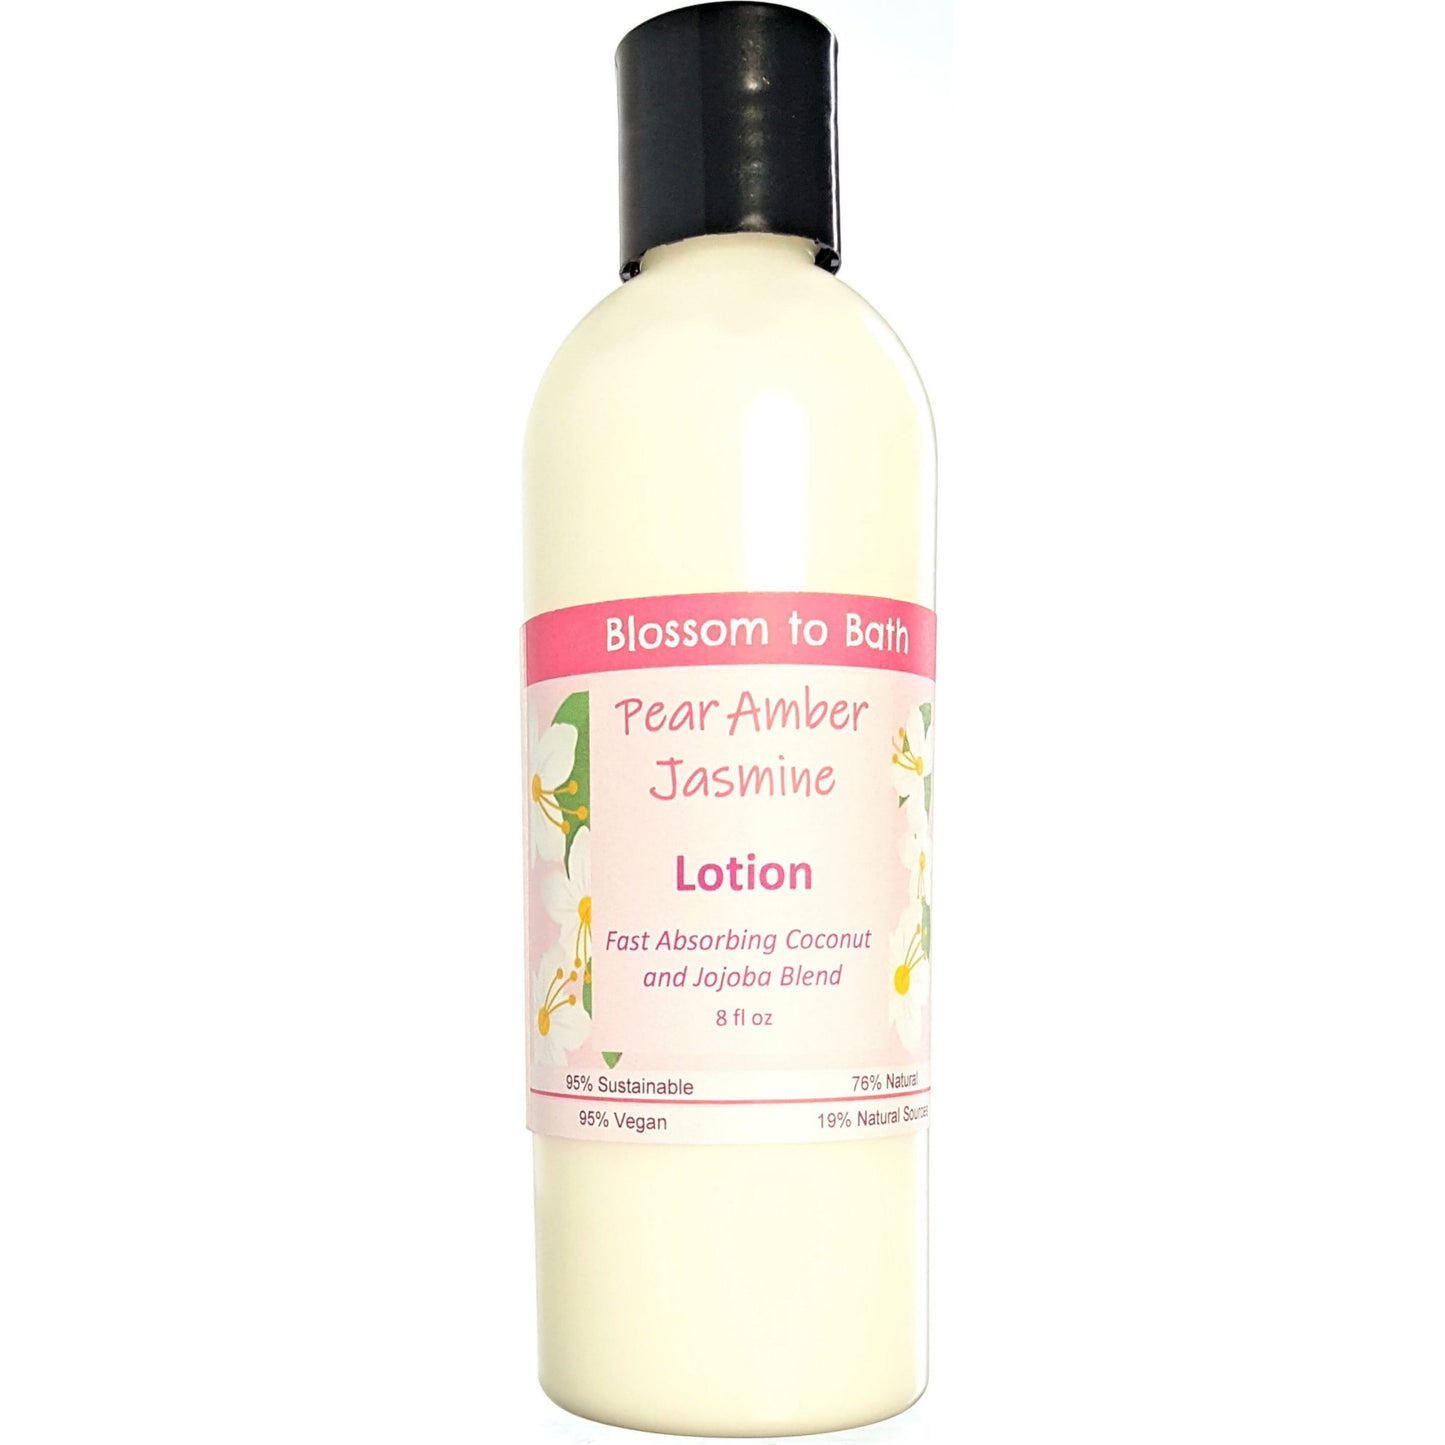 Buy Blossom to Bath Pear Amber Jasmine Lotion from Flowersong Soap Studio.  Daily moisture  that soaks in quickly made with organic oils and butters that soften and smooth the skin  A scent that lets you escape to an island paradise of pear, jasmine, and warm spices.